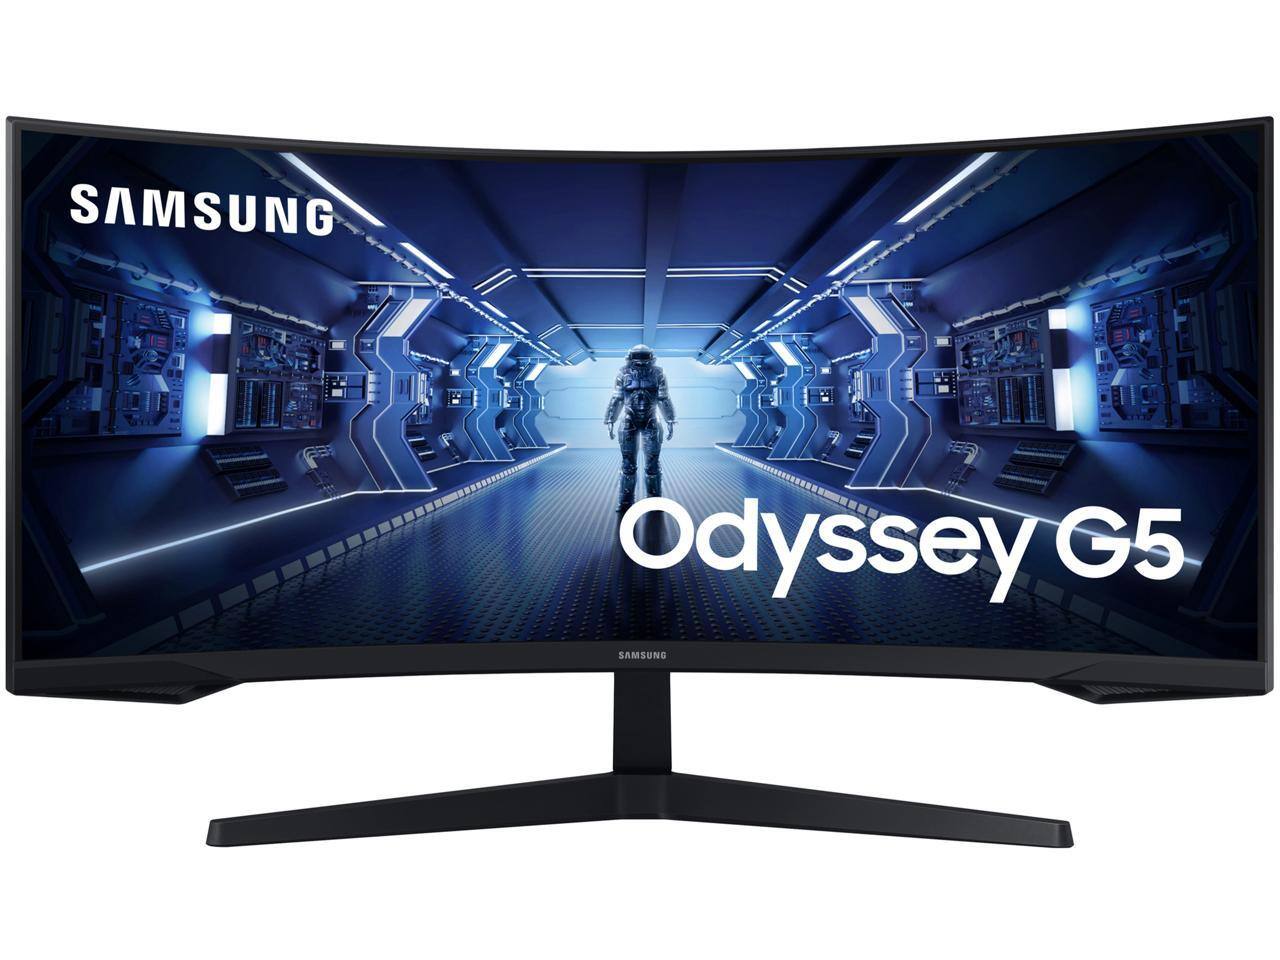 SAMSUNG Odyssey G5 C34G55T 34" WQHD 3440 x 1440 (2K) 1ms (MPRT) 165Hz HDR10, HDMI, DP FreeSync Premium Curved Gaming Monitor for $499.99 after AC + F/S